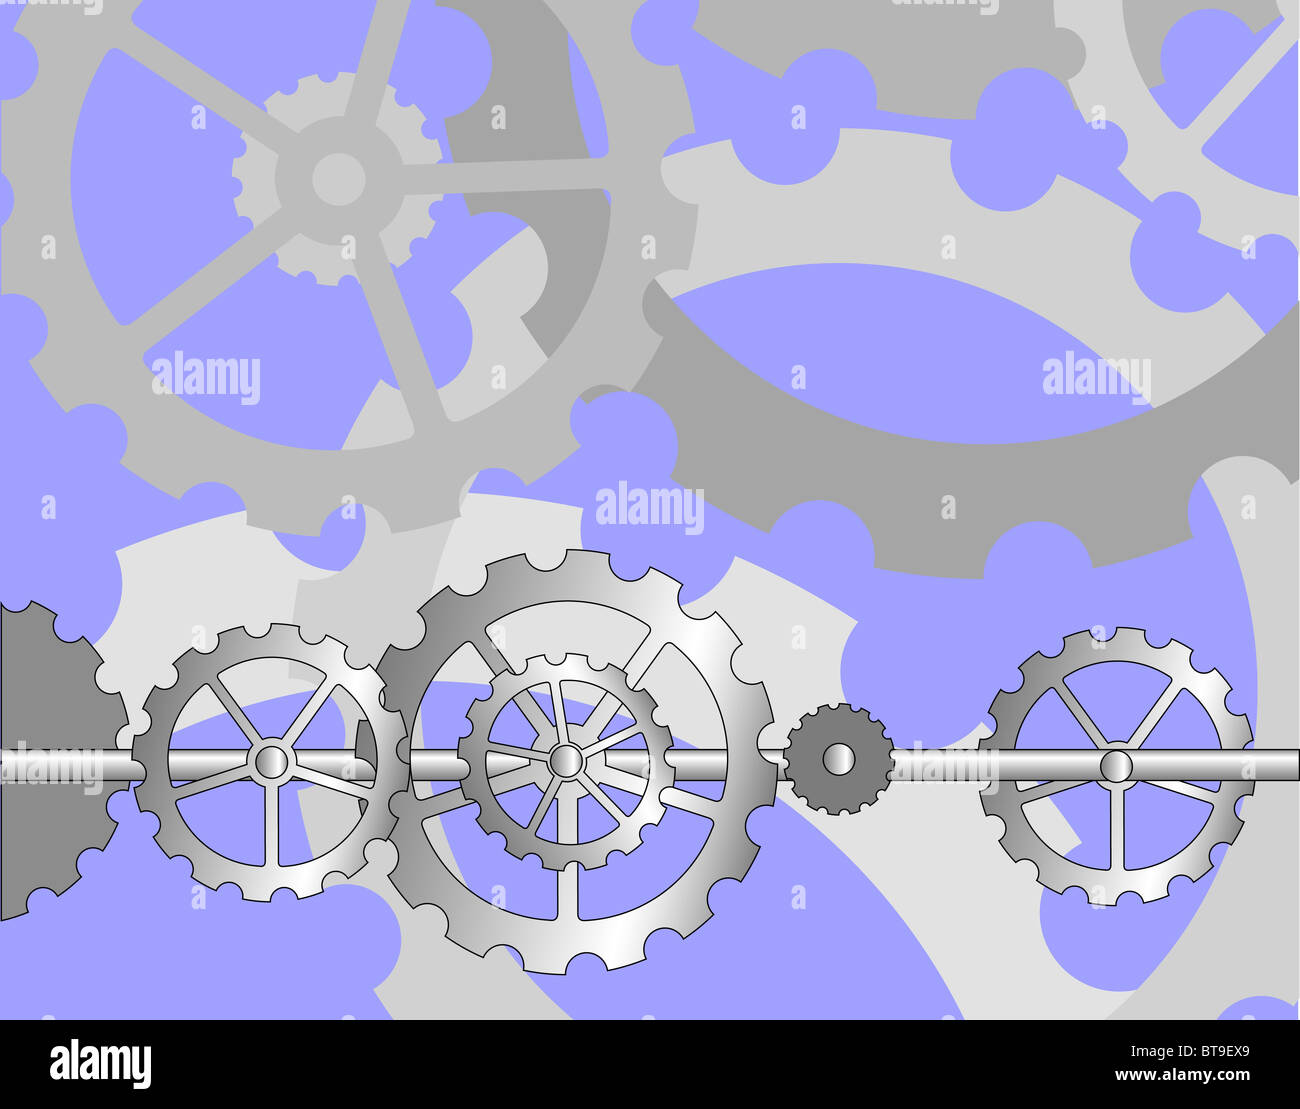 Illustrated background of cogs and wheels mechanism Stock Photo